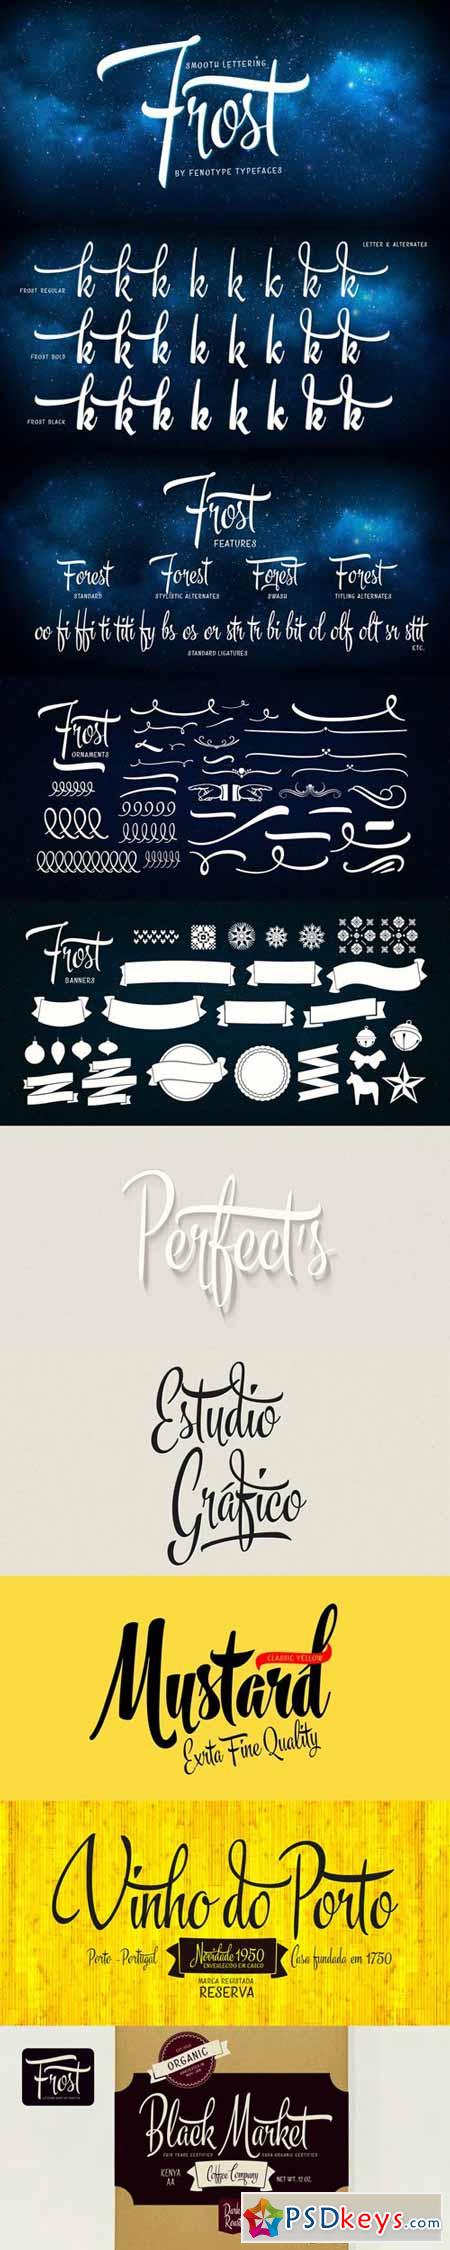 Frost Font Family $69